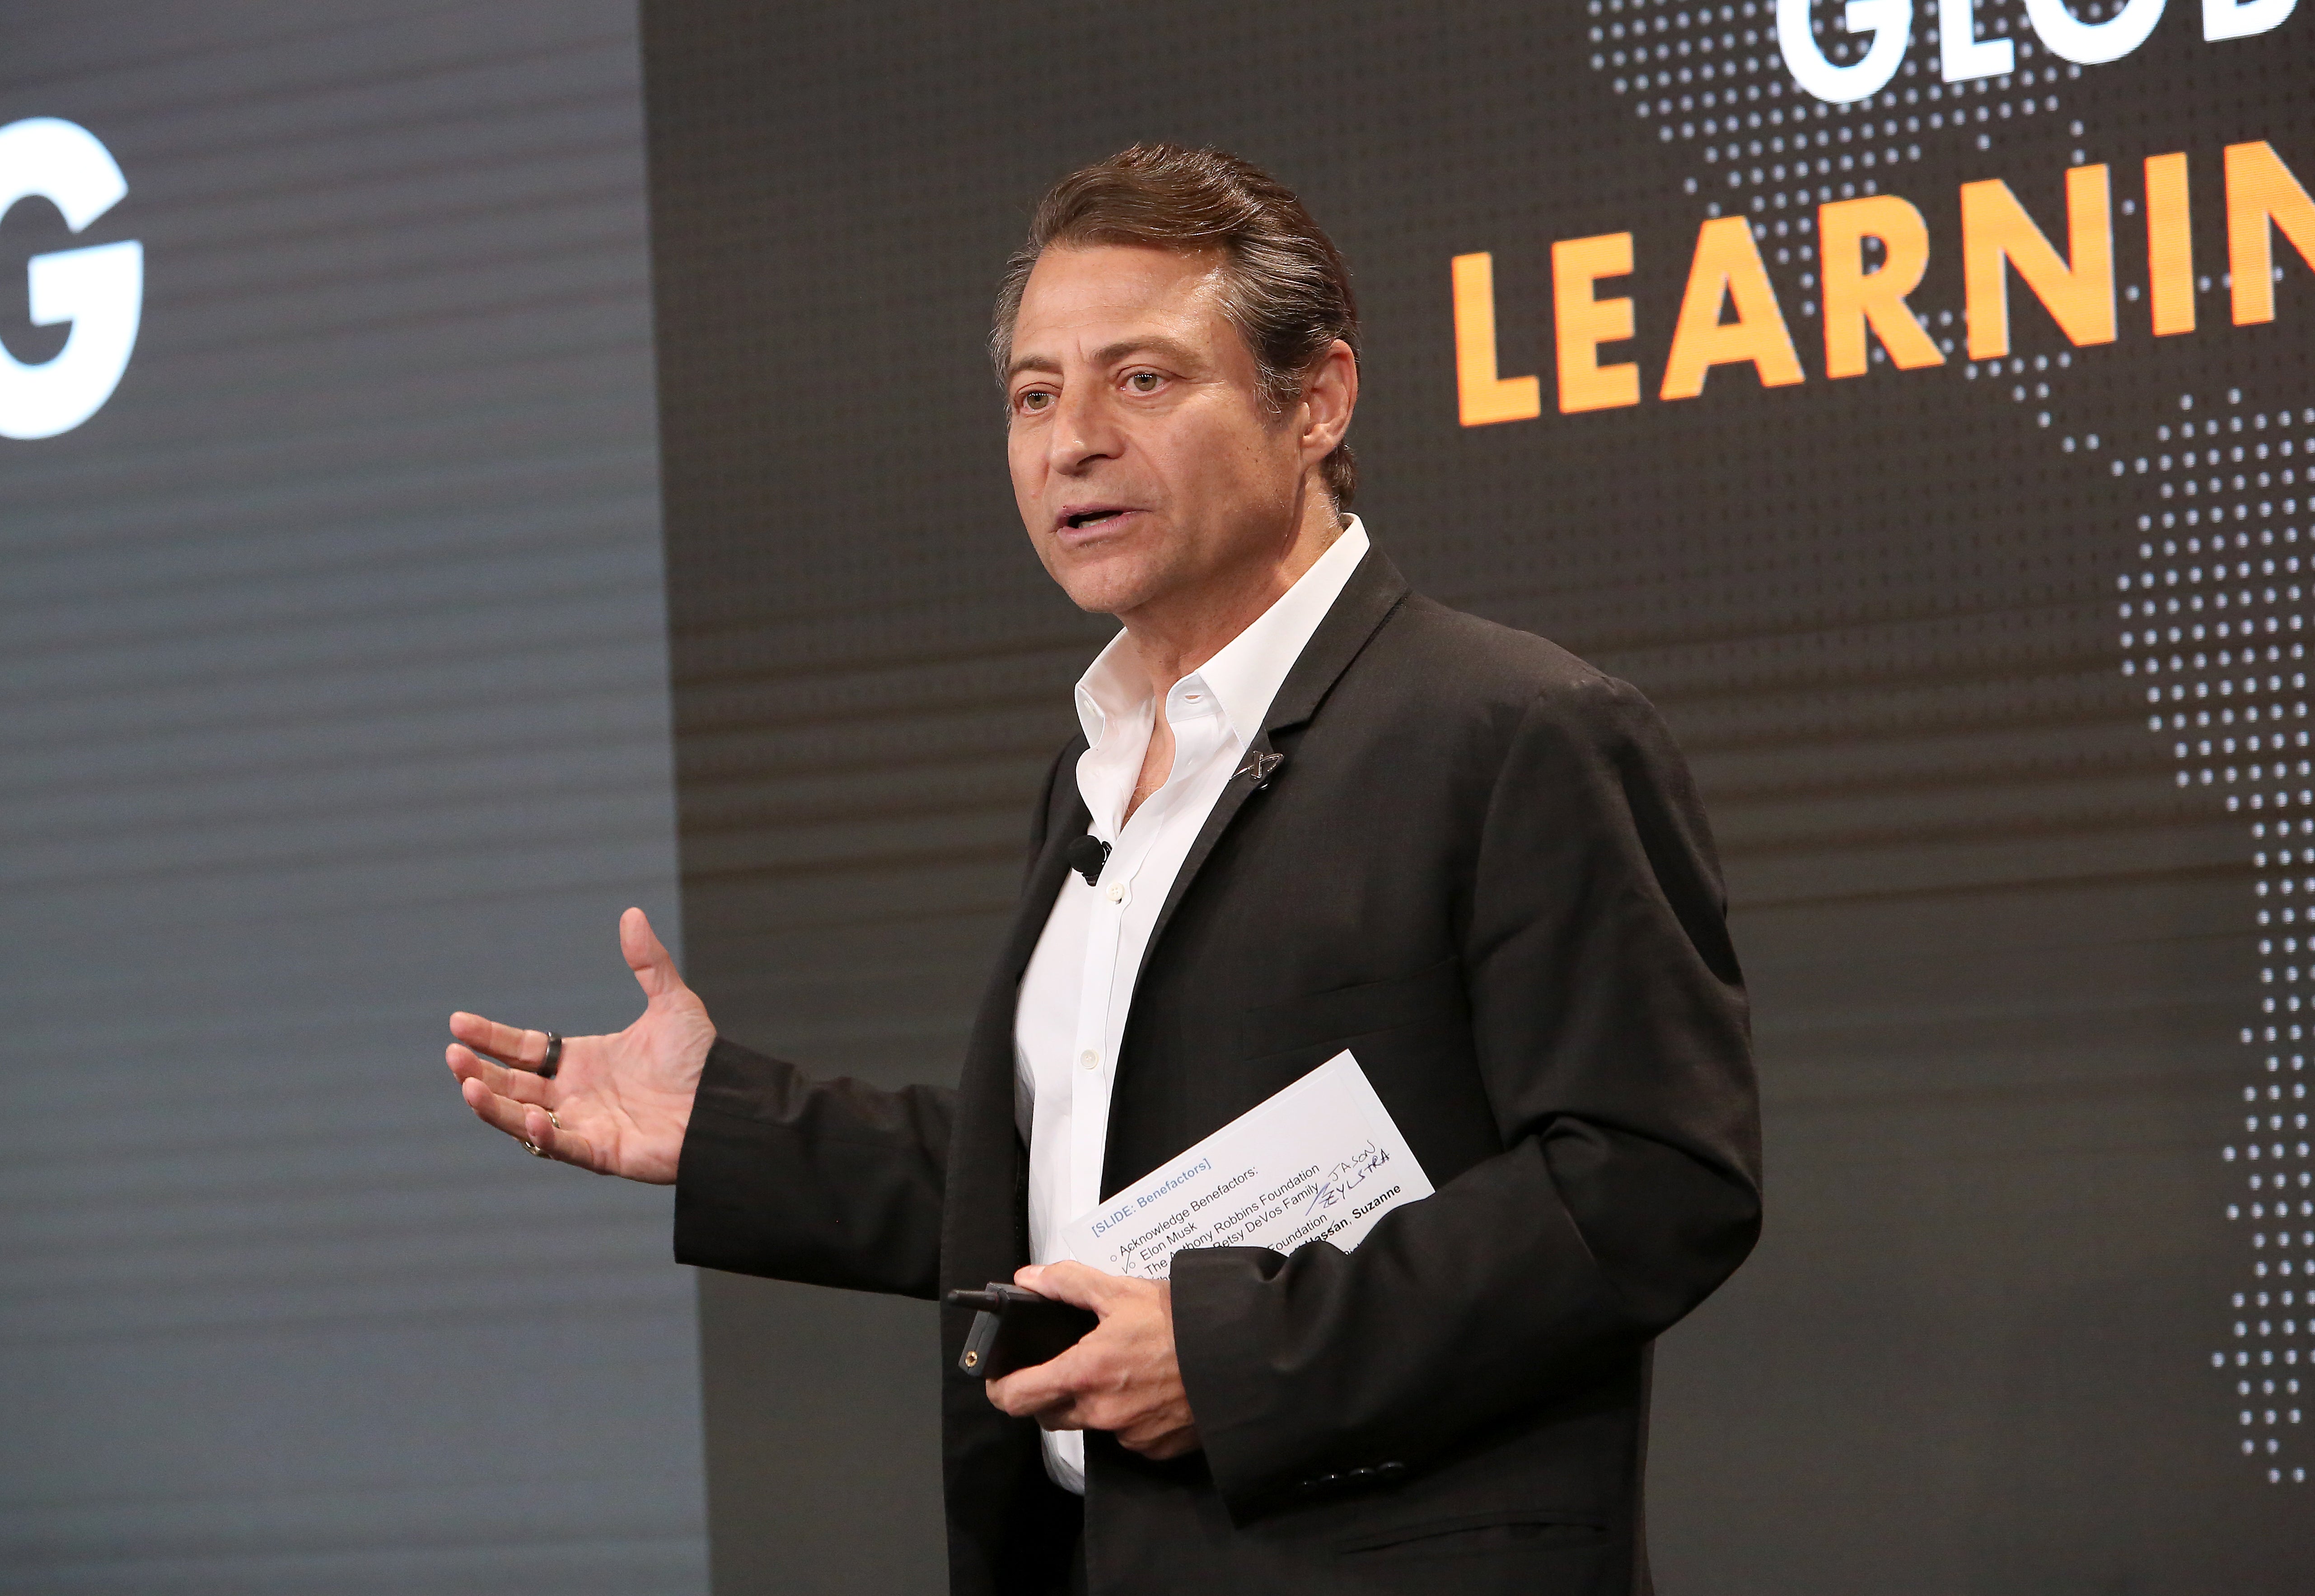 Peter Diamandis attends the Global Learning XPRIZE Foundation Grand-prize Awards on May 15, 2019.